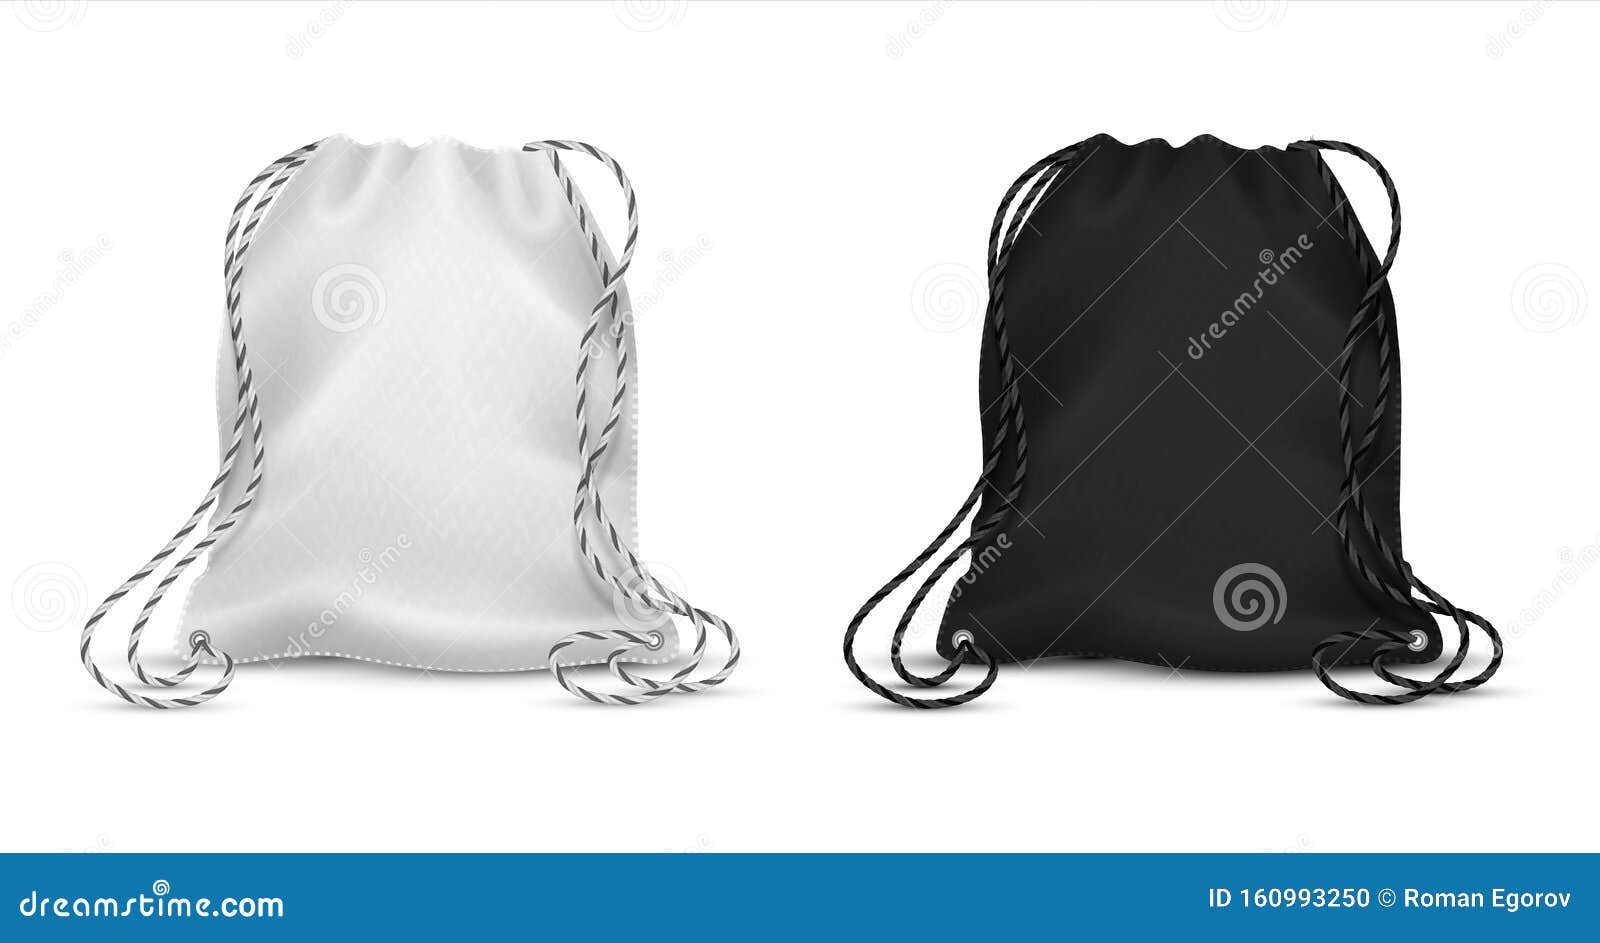 Download Realistic Drawstring Bags. Blank Black And White Backpack Mockup For Corporate Identity, Sport ...